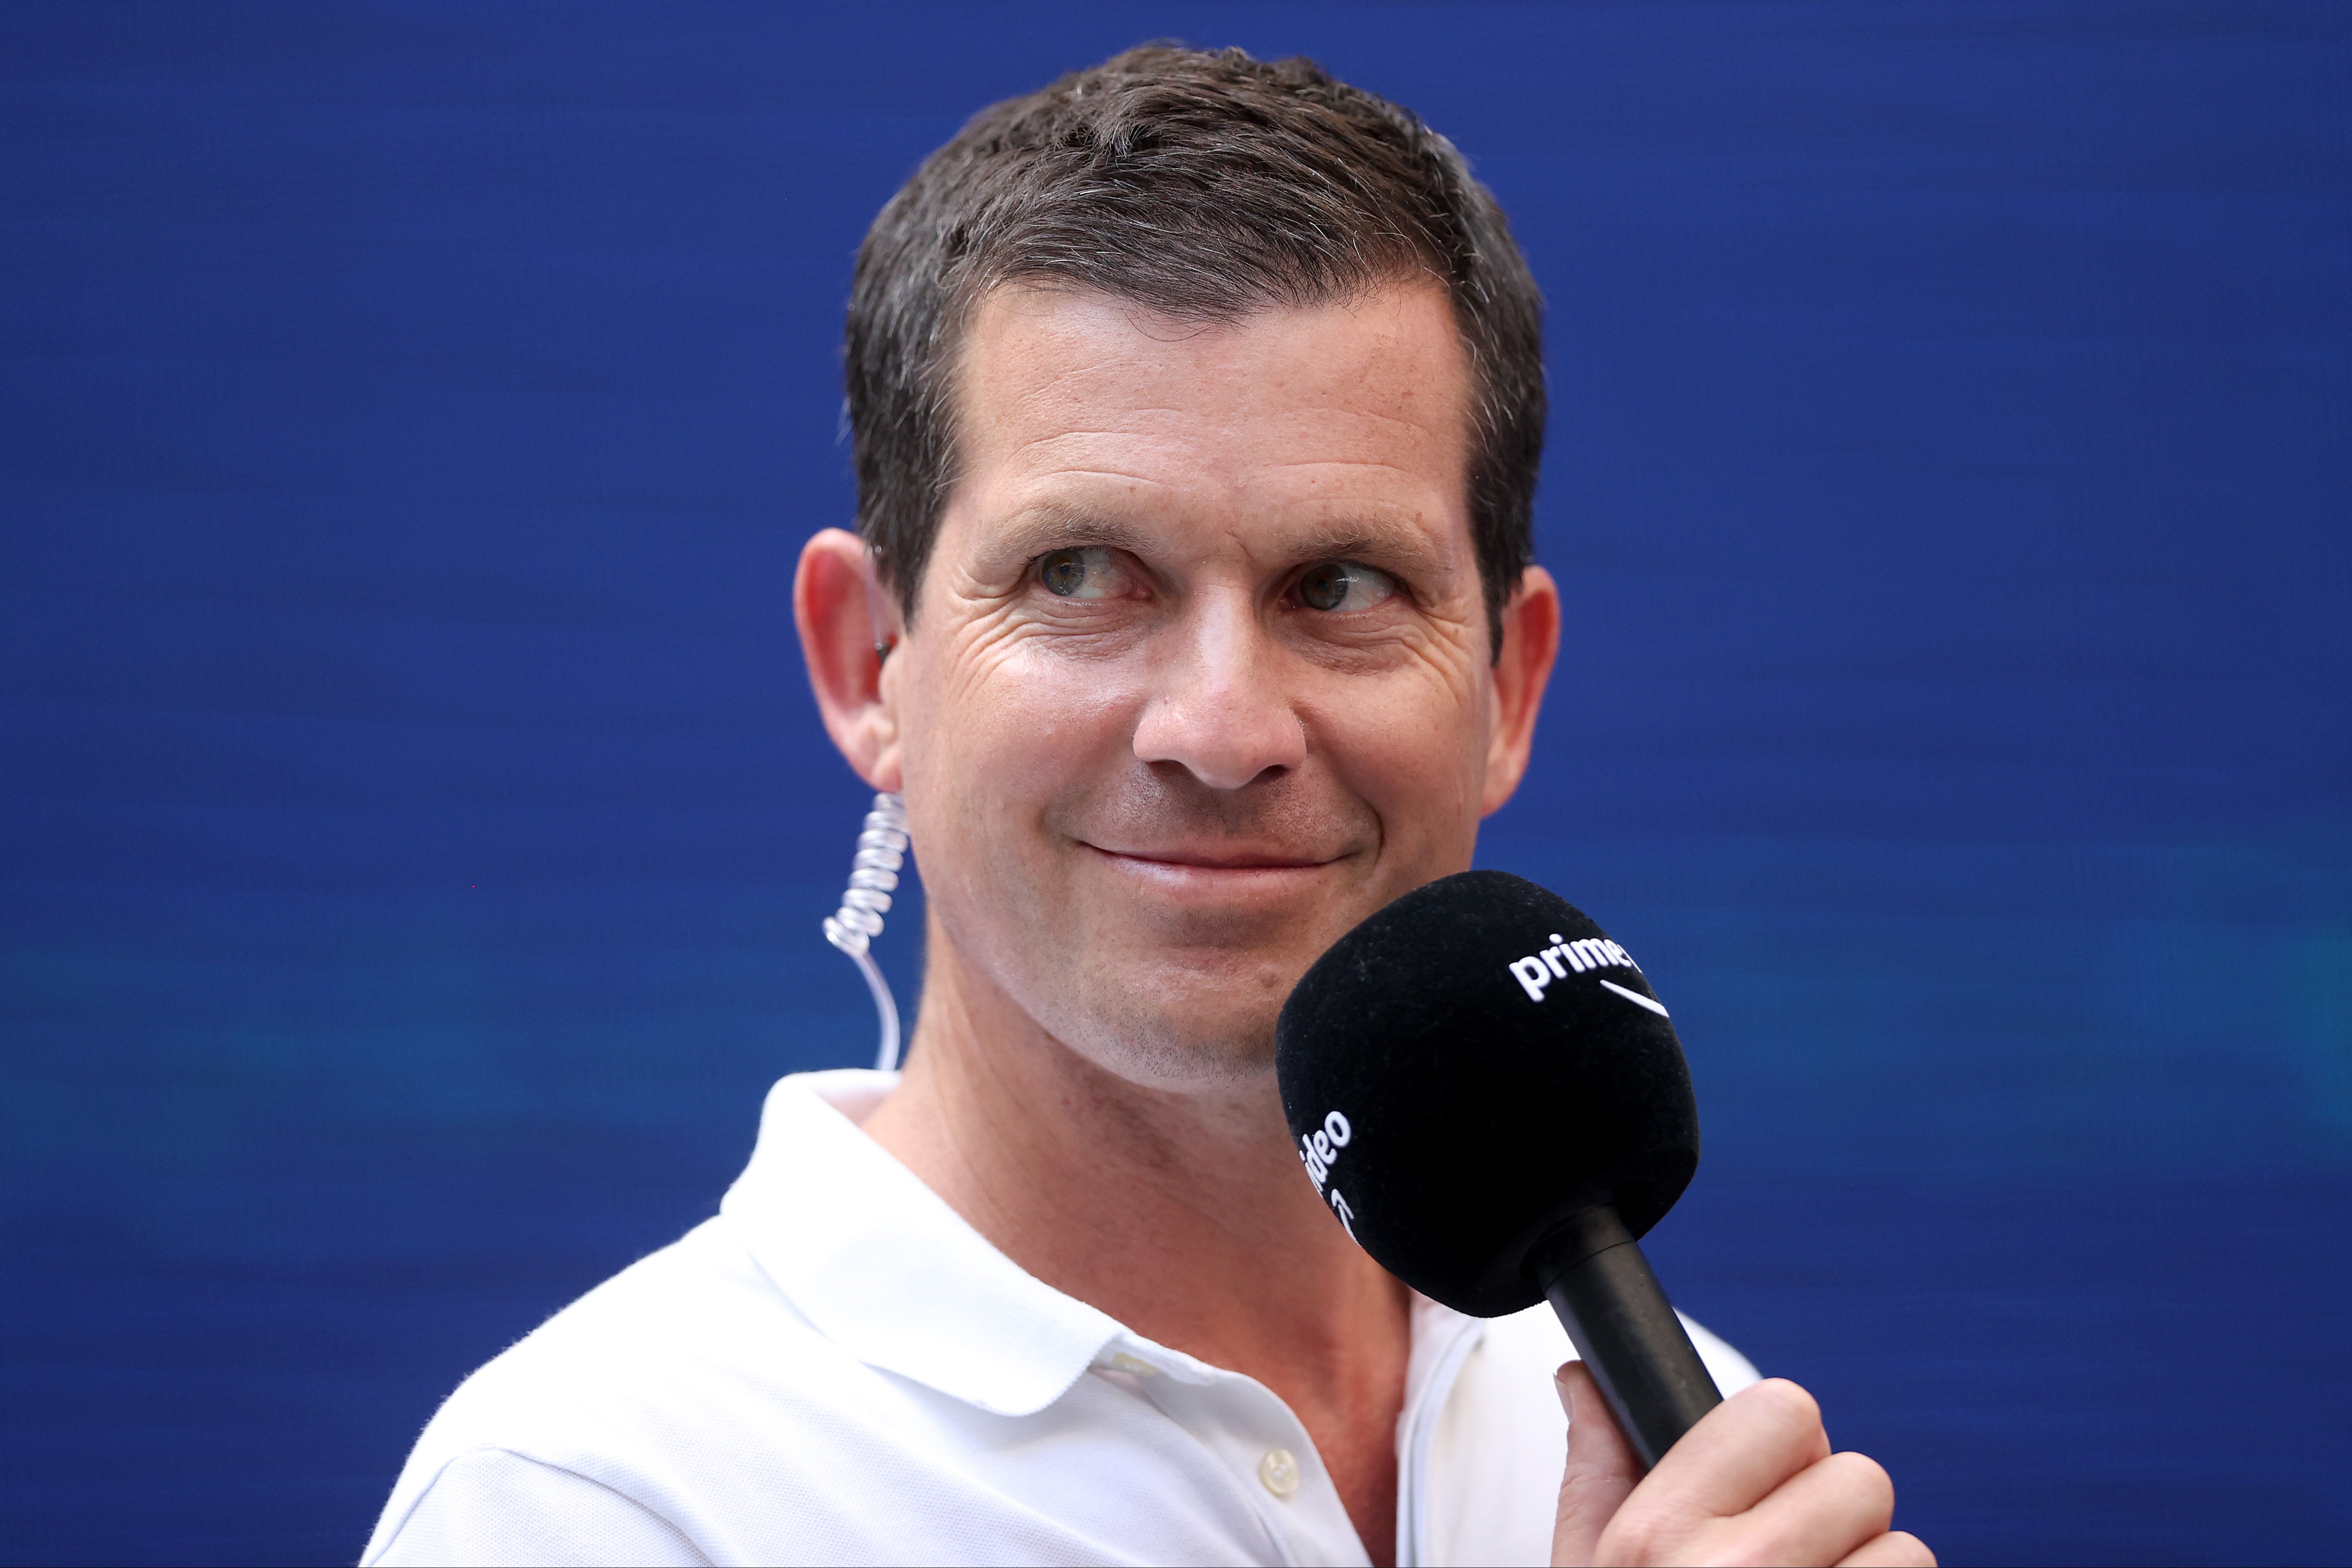 Tim Henman will be part of Sky Sports’ team